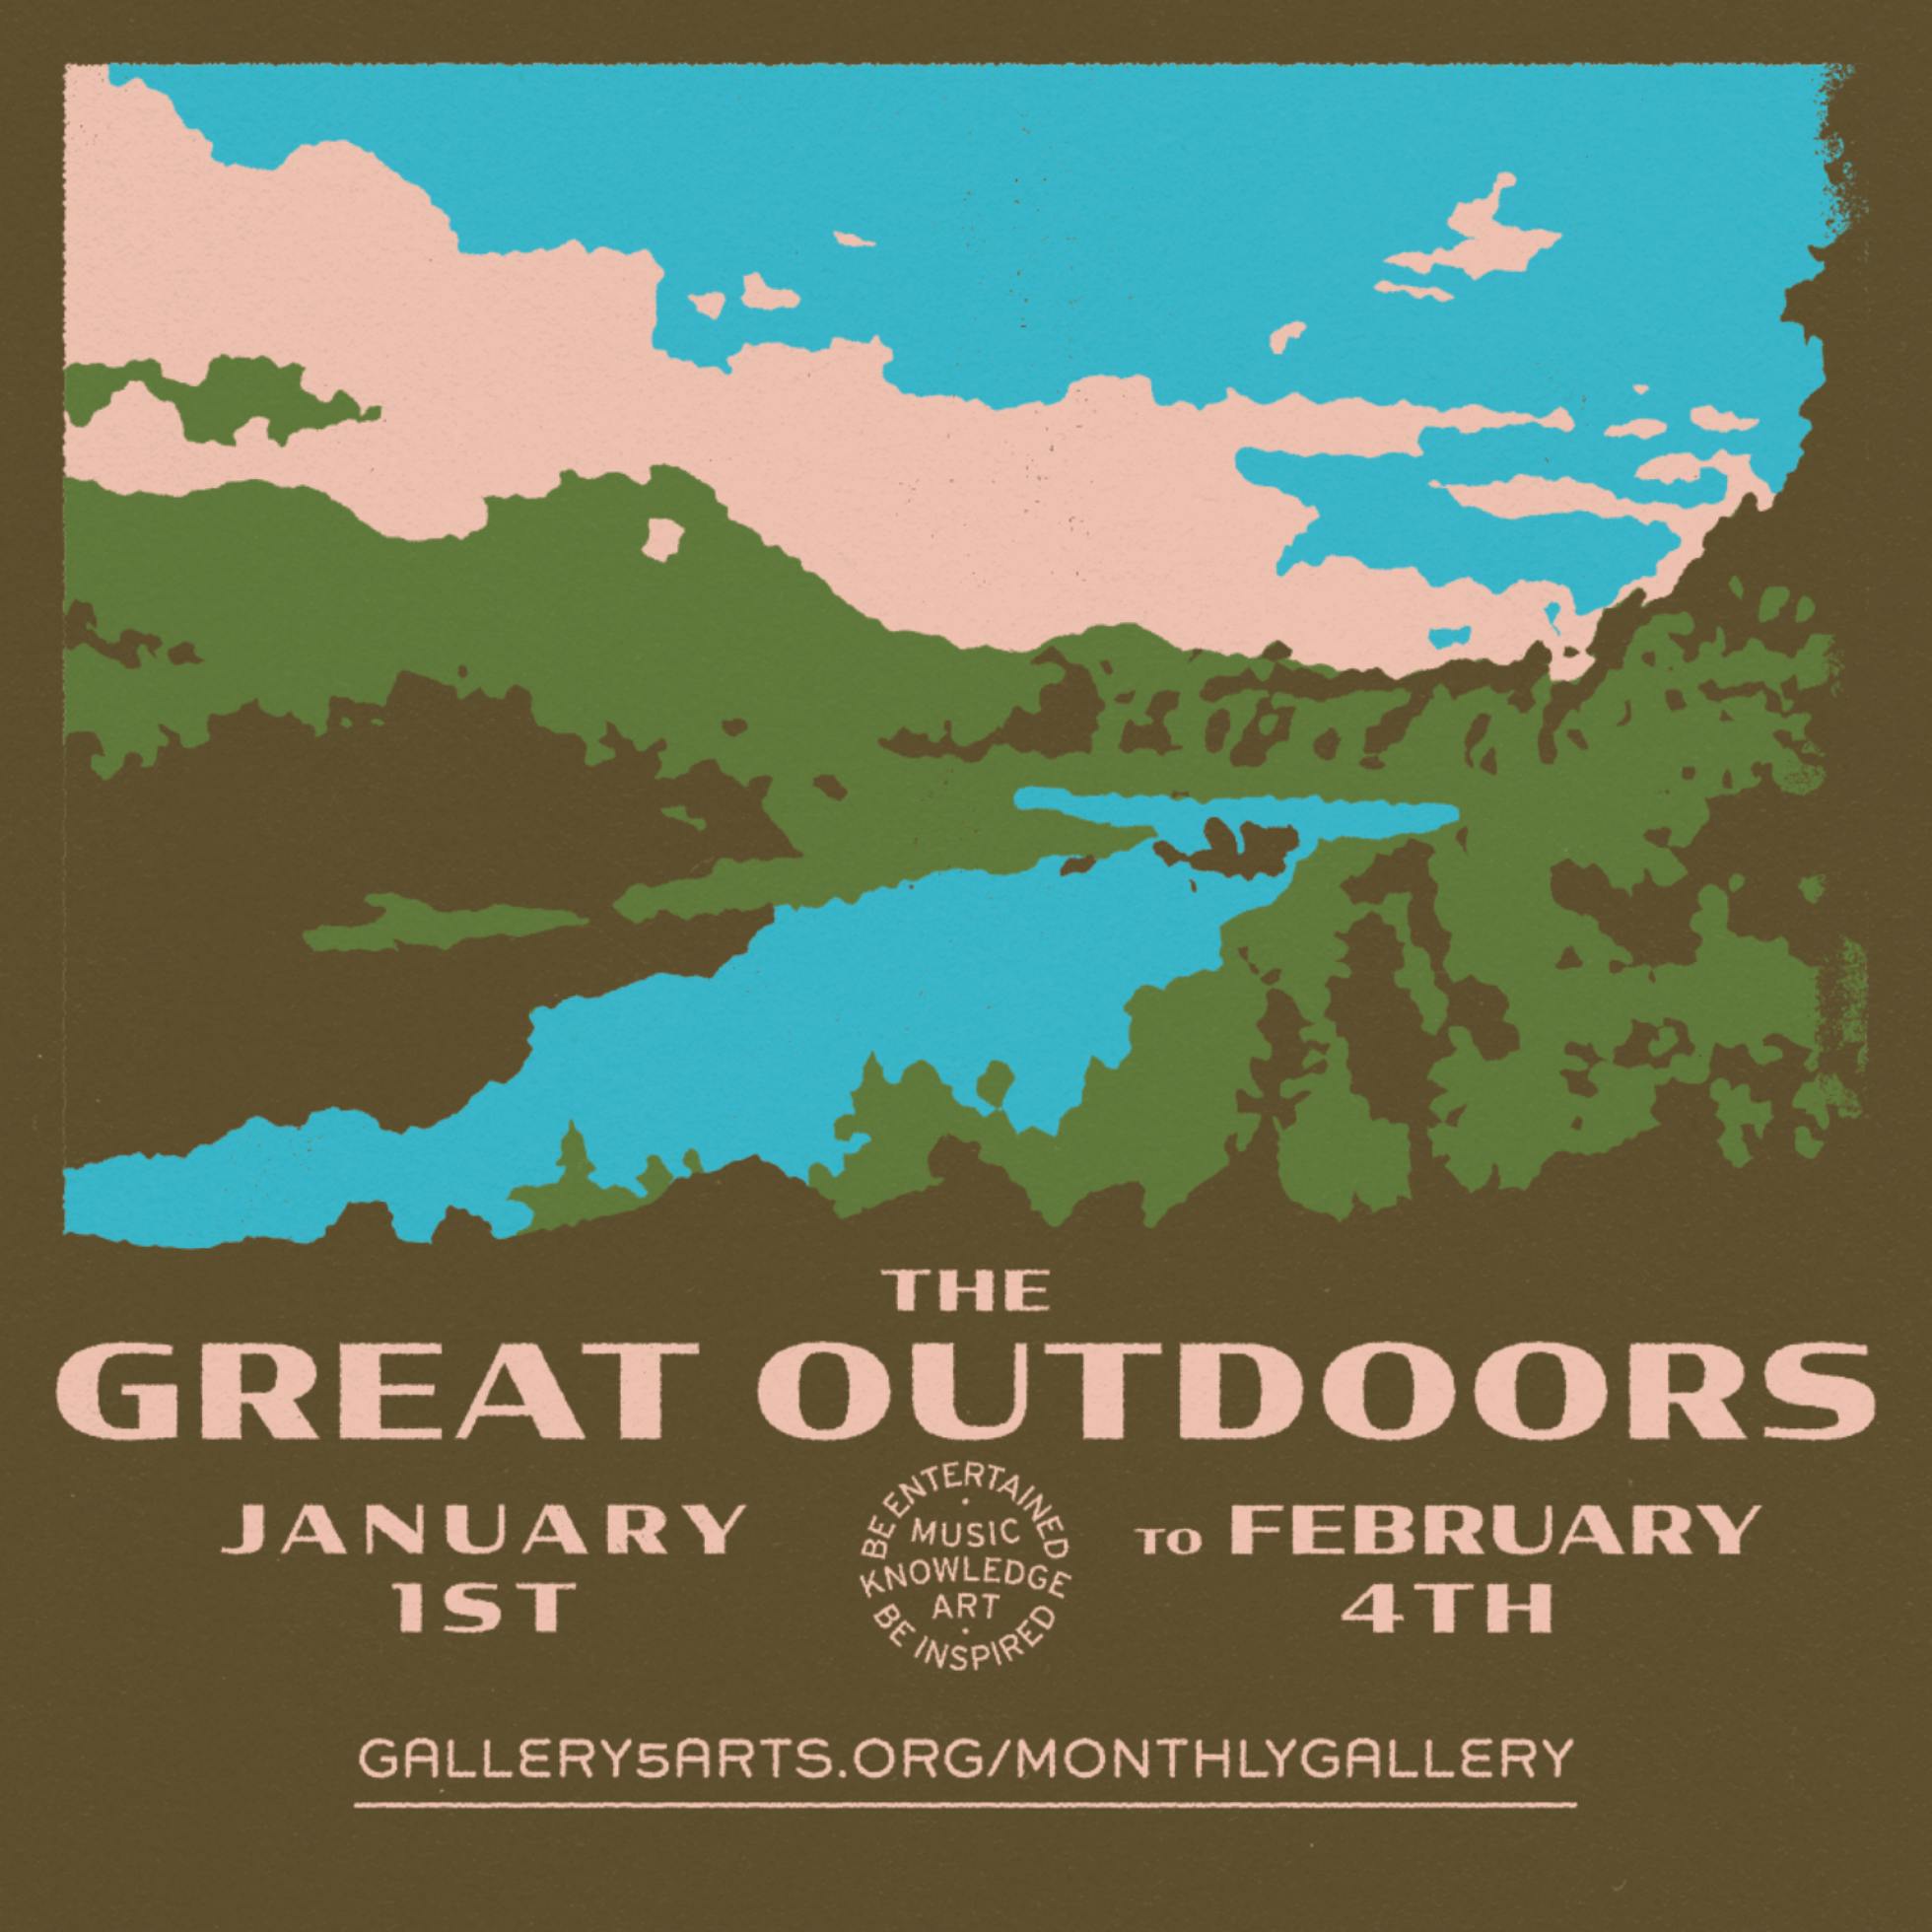 Gallery 5's Virtual Monthly Gallery: The Great Outdoors